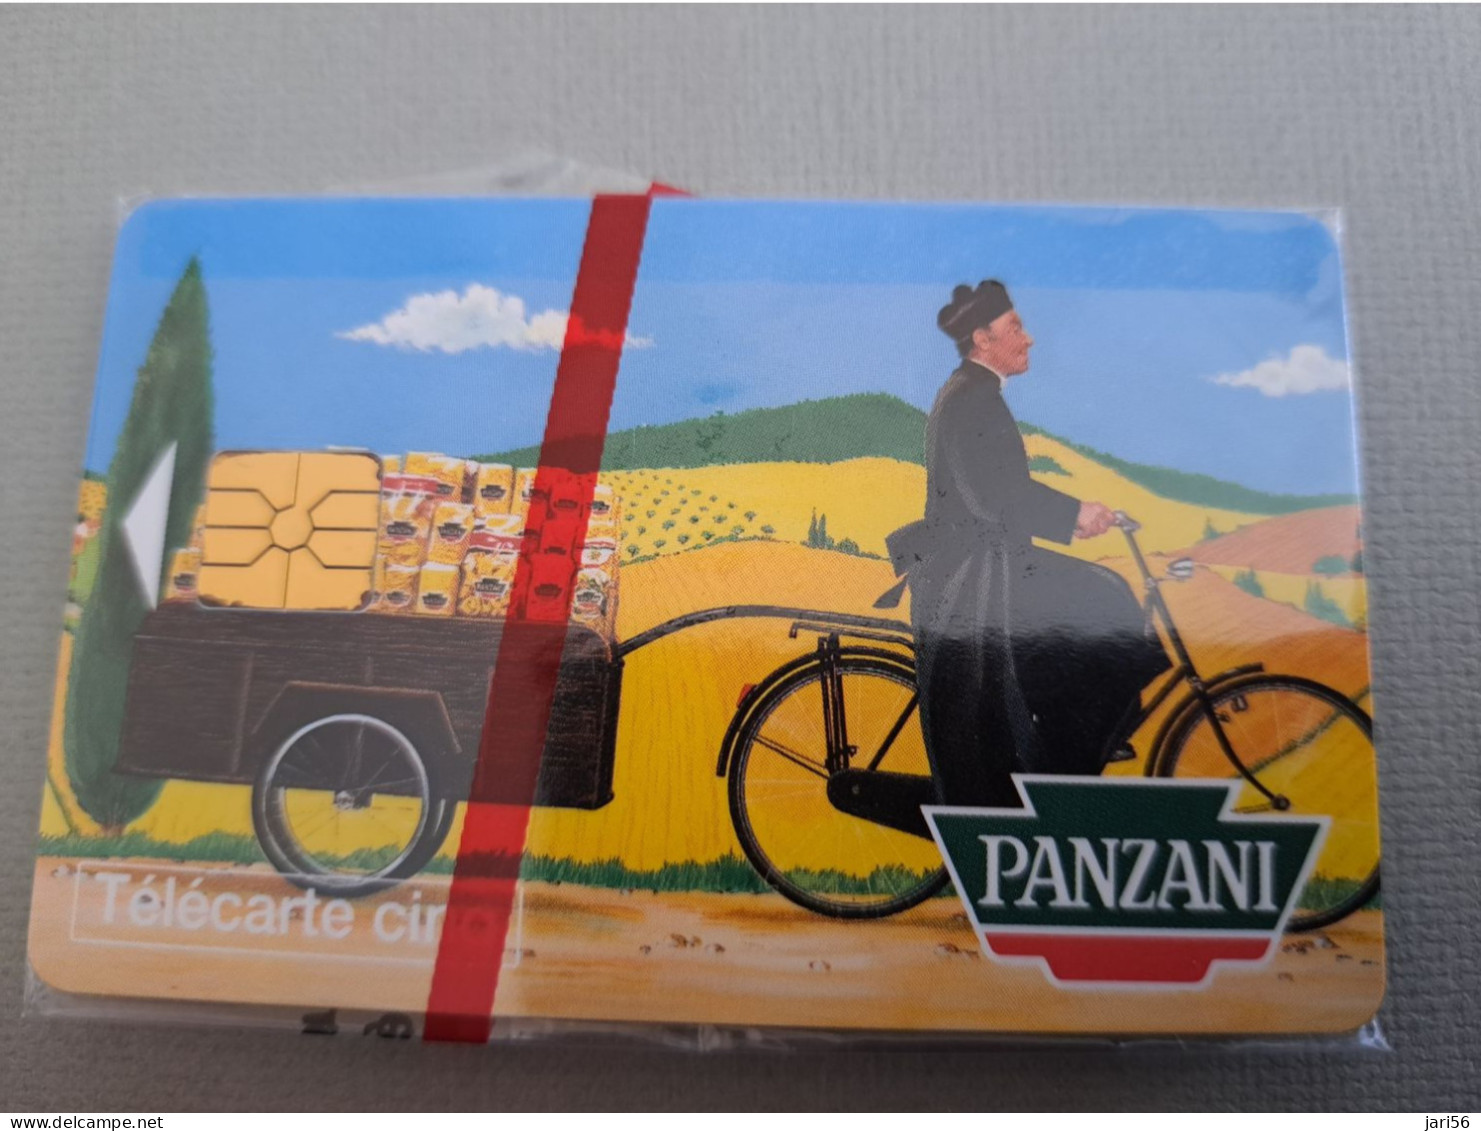 FRANCE/FRANKRIJK   CHIPCARD / PRIVE/ TELECARTE CINQ/ PANZANI/BYCICLE   MINT IN WRAPPER     WITH CHIP     ** 13633** - Mobicartes (GSM/SIM)